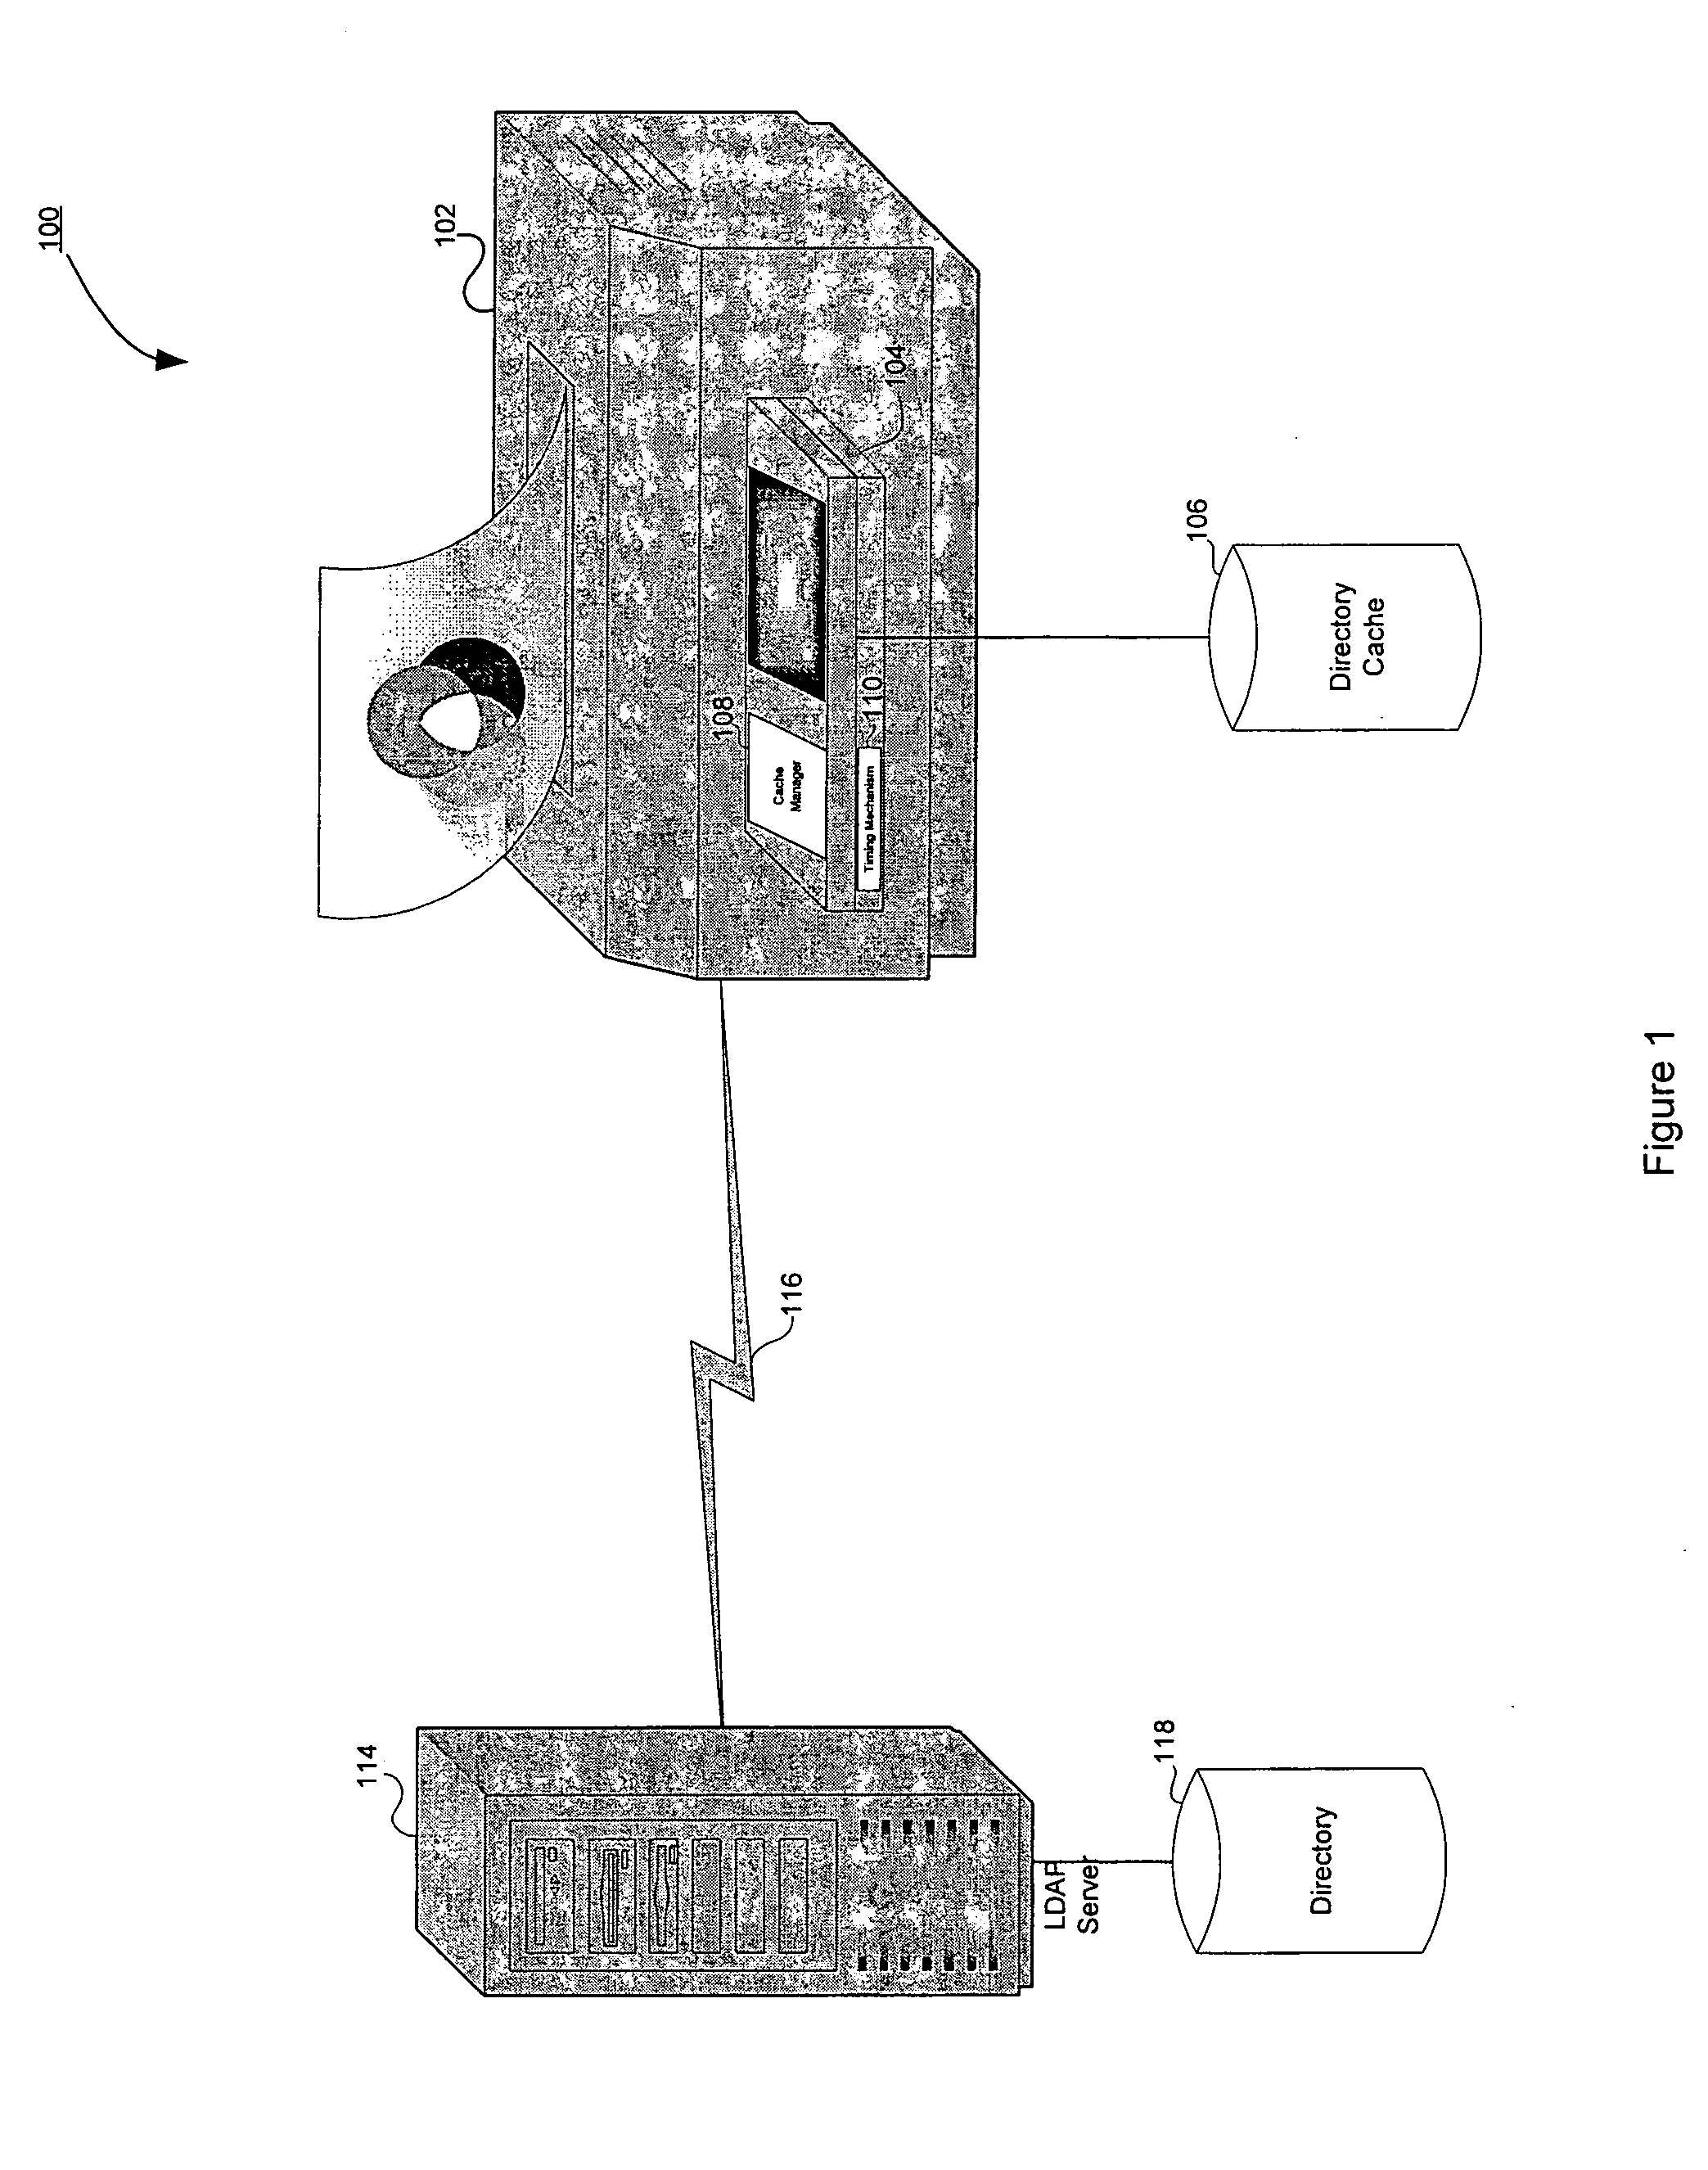 System and method for caching directory data in a networked computer environment